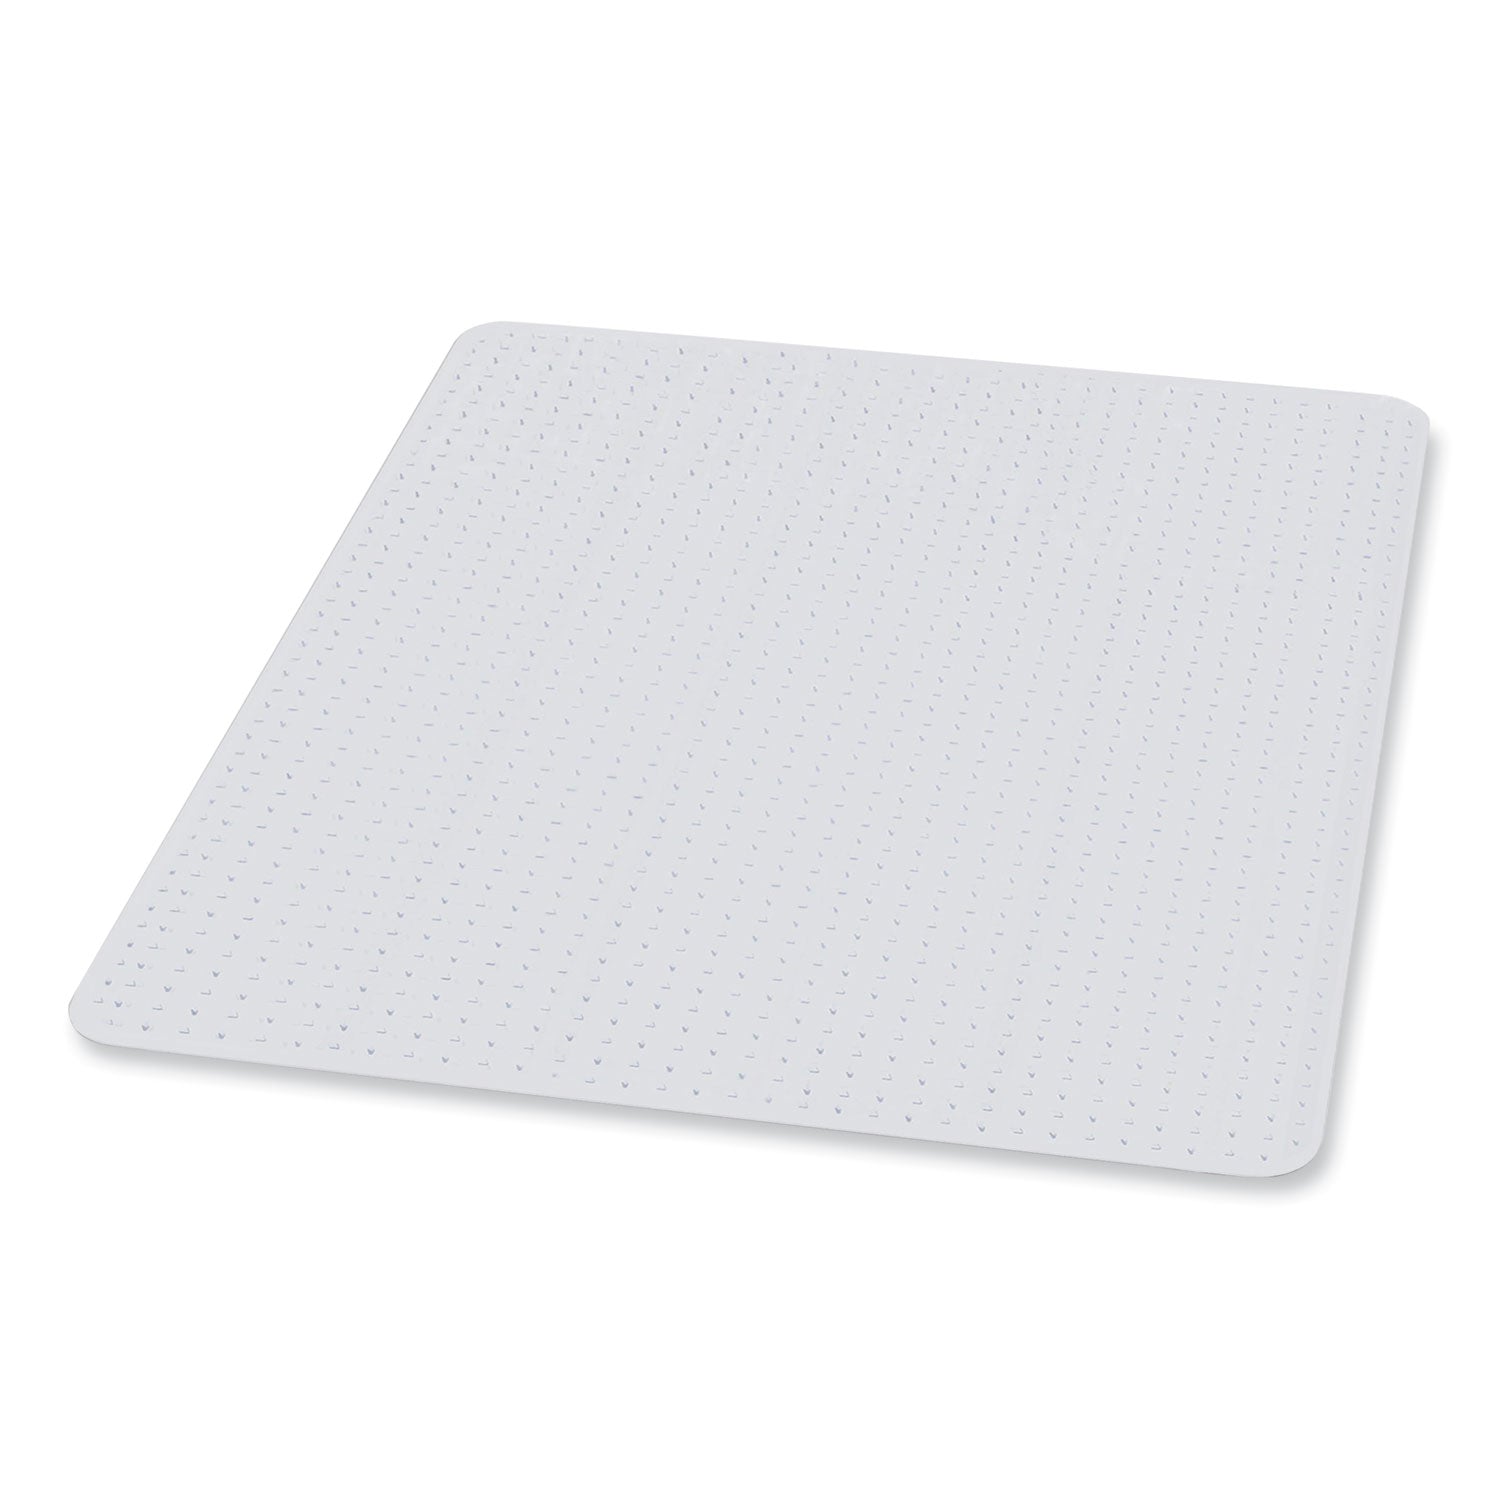 everlife-chair-mat-for-medium-pile-carpet-square-60-x-60-clear-ships-in-4-6-business-days_esr122681 - 1